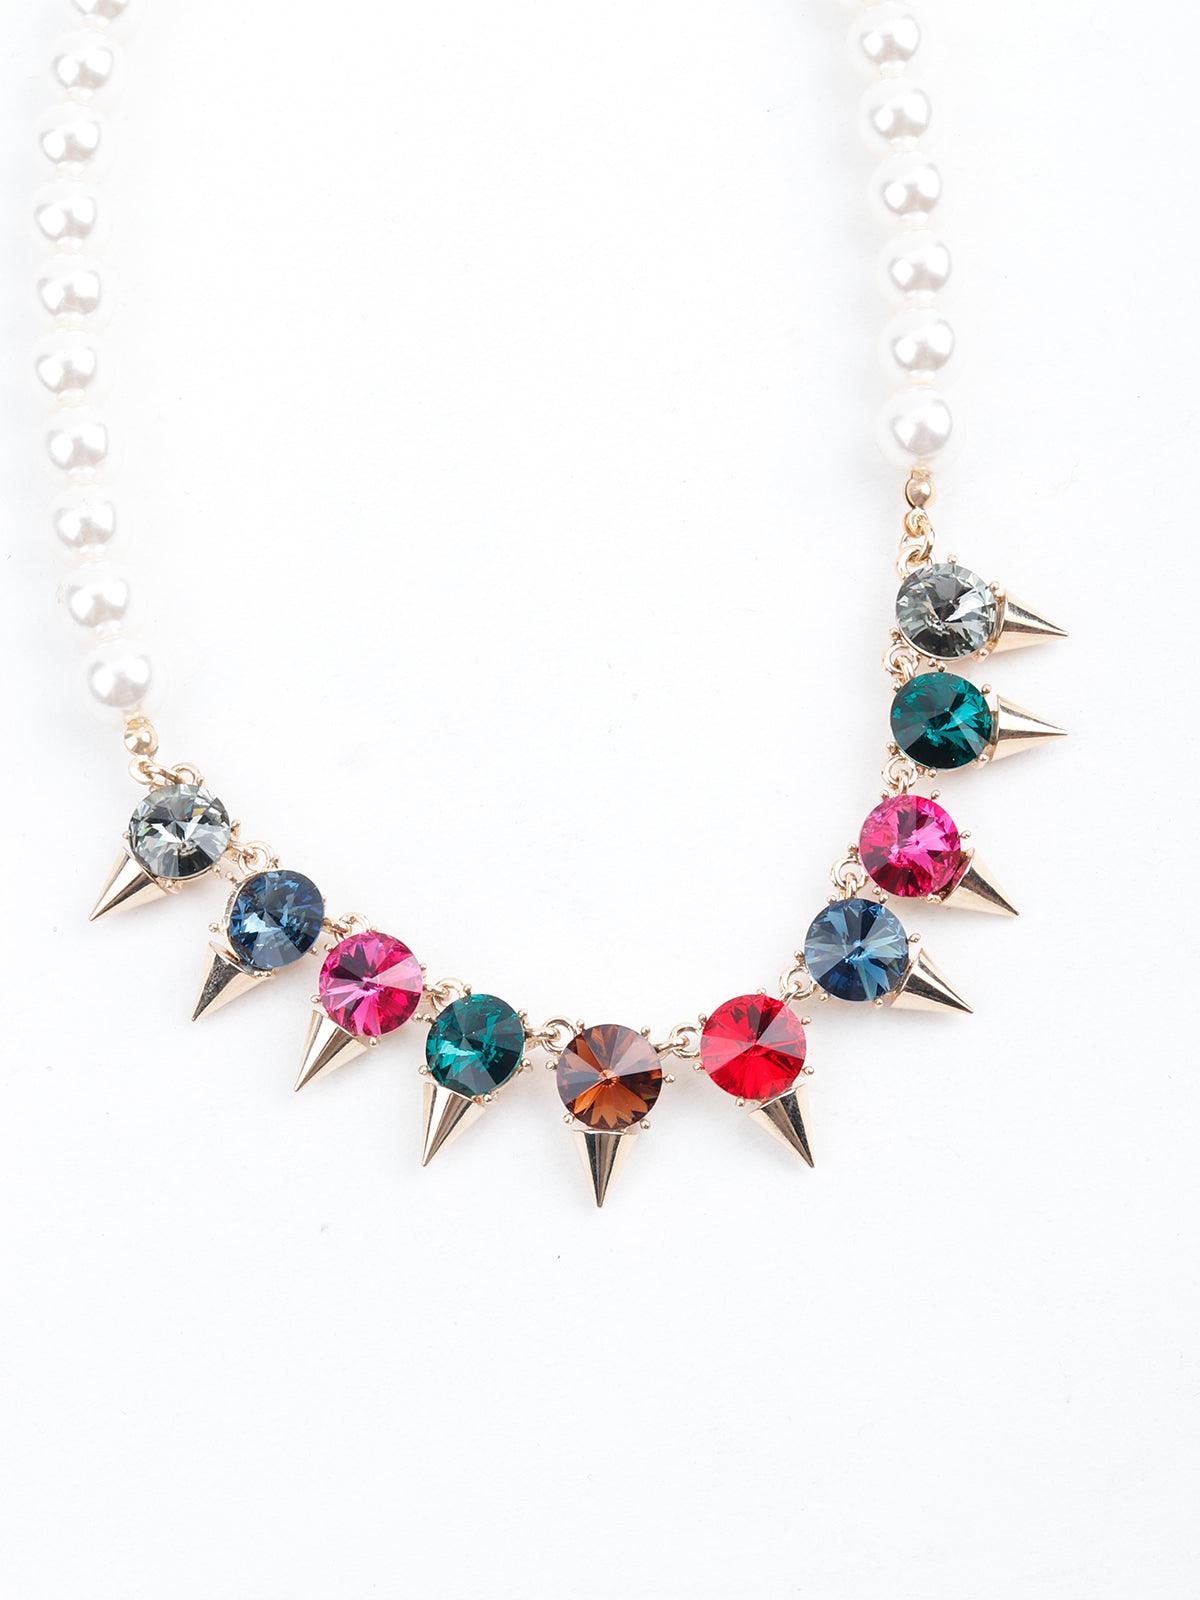 Multi-coloured rhine stones and beaded pearl necklace - Odette